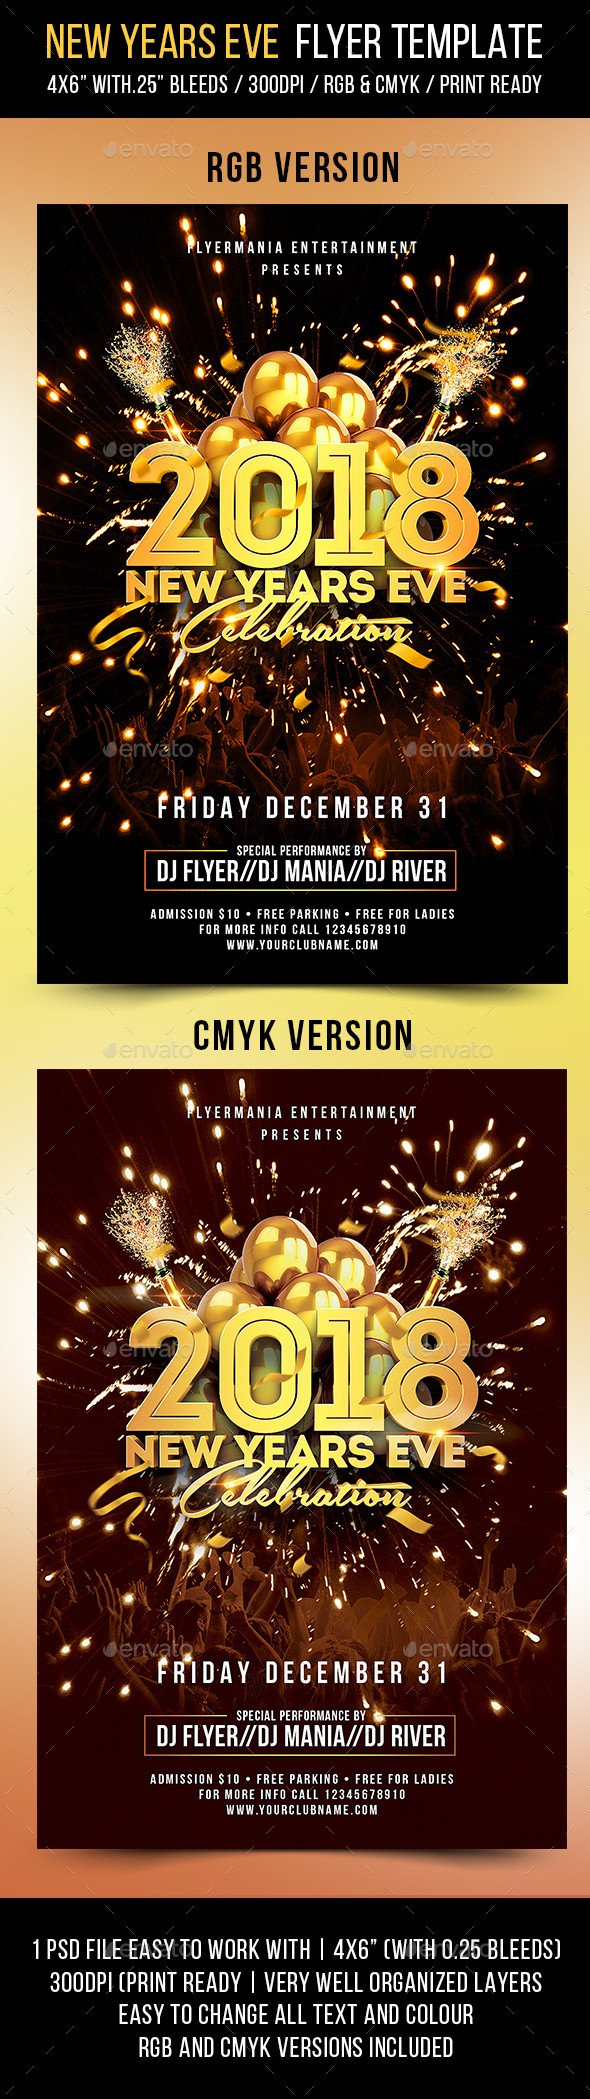 New Years Eve Flyer Template by Flyermania